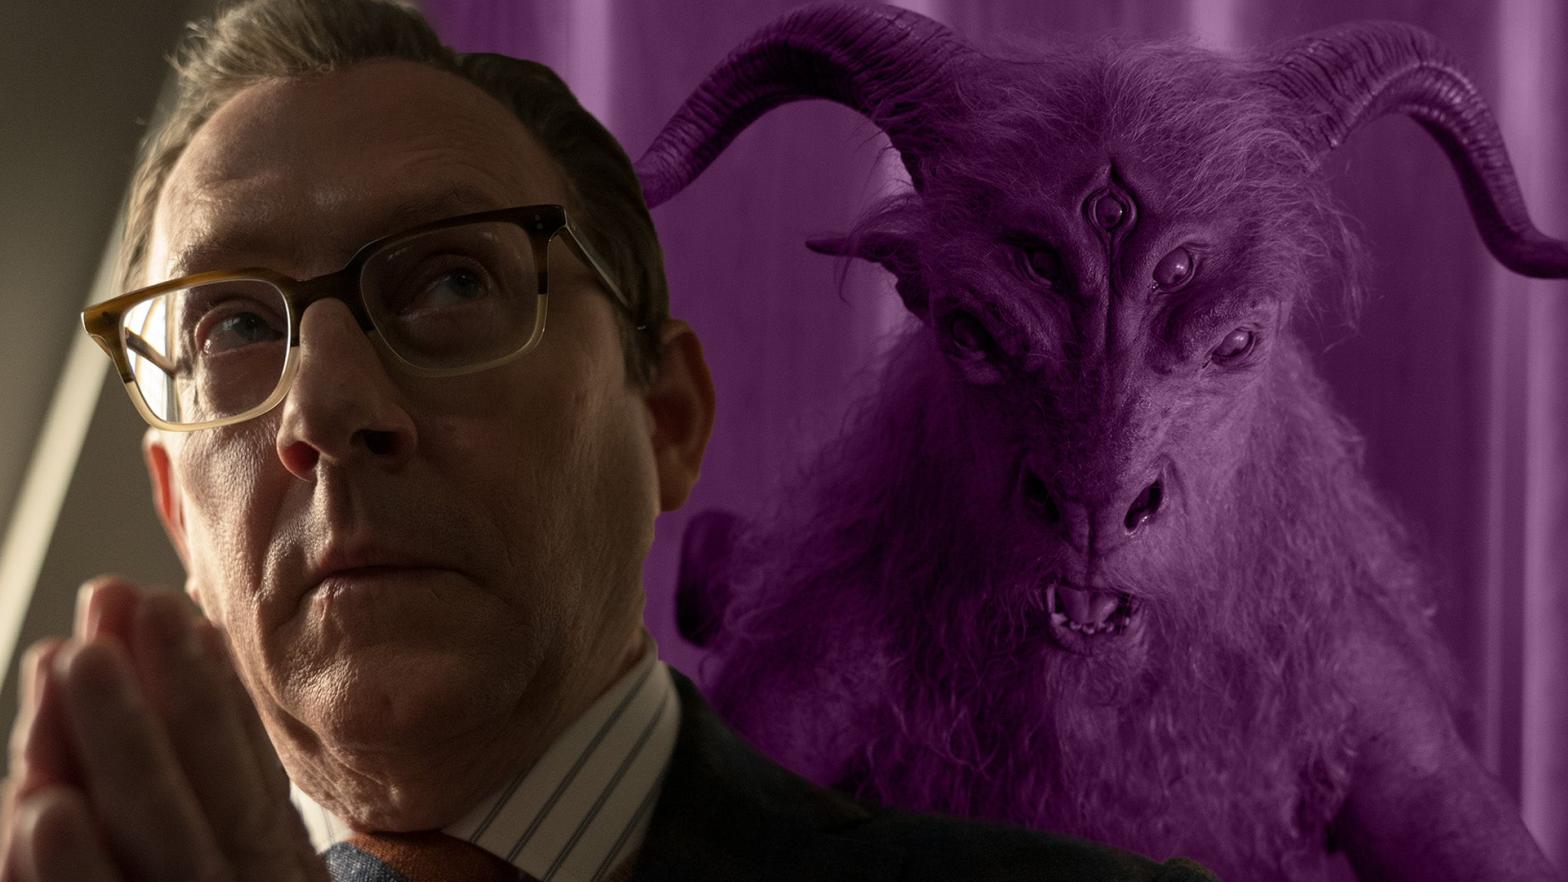 Evil’s Michael Emerson on Working Opposite a Giant, Hairy, Five-Eyed Demon